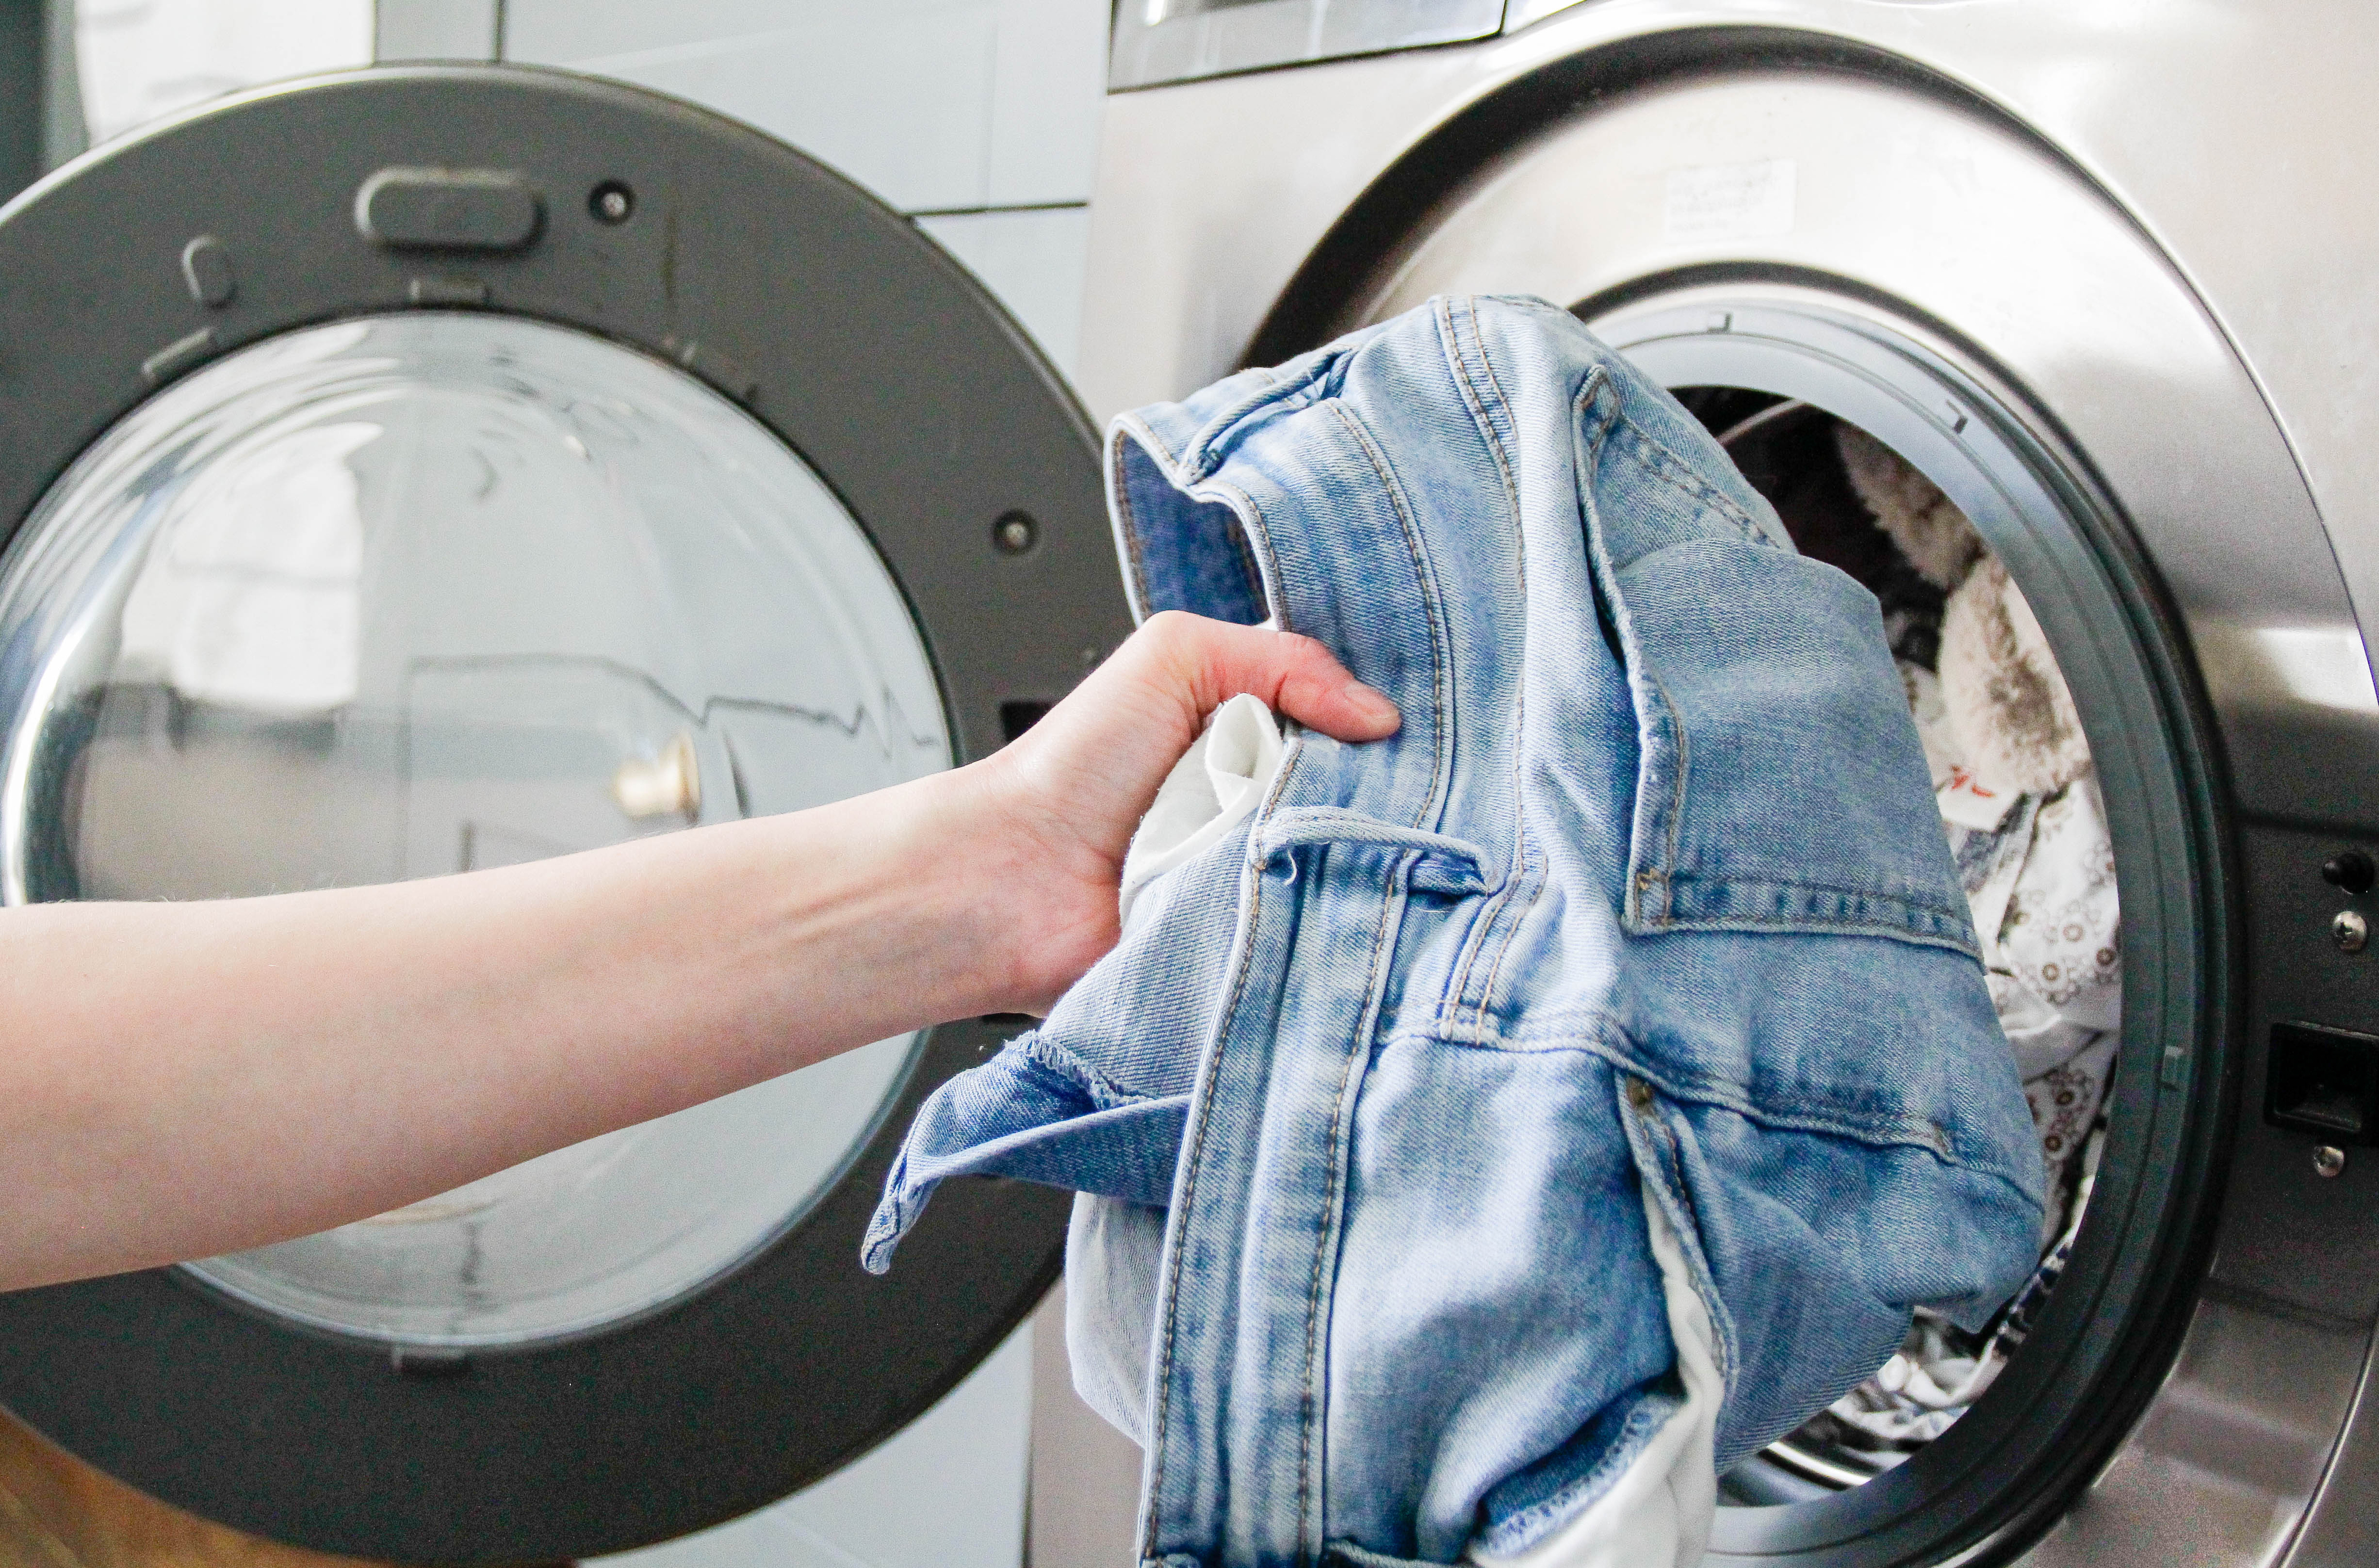 Person putting jeans into a washing machine, relating to laundry as a chore or business